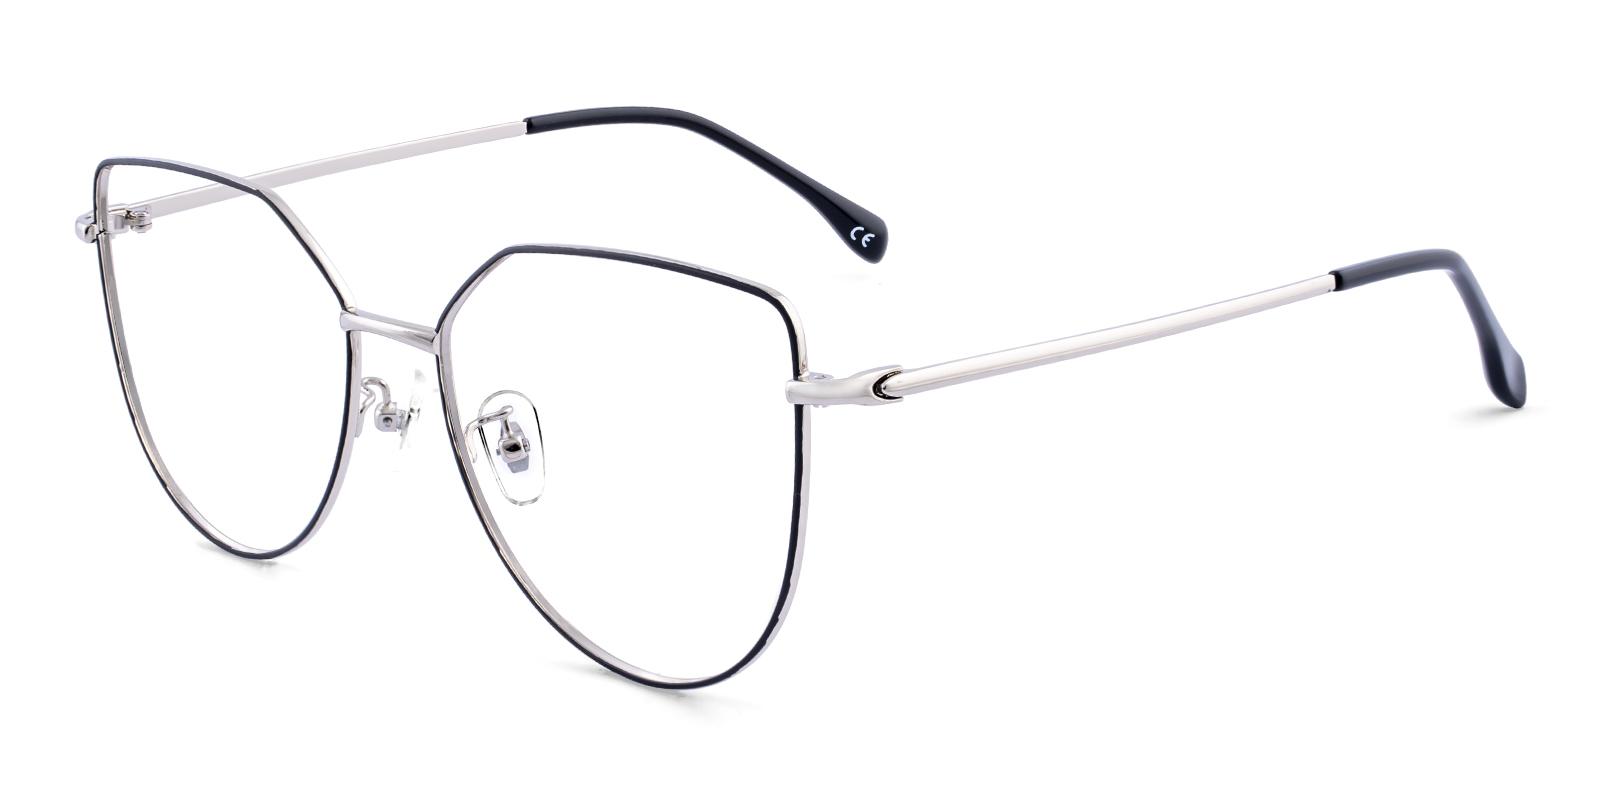 Pastth Silver Metal Eyeglasses , NosePads Frames from ABBE Glasses